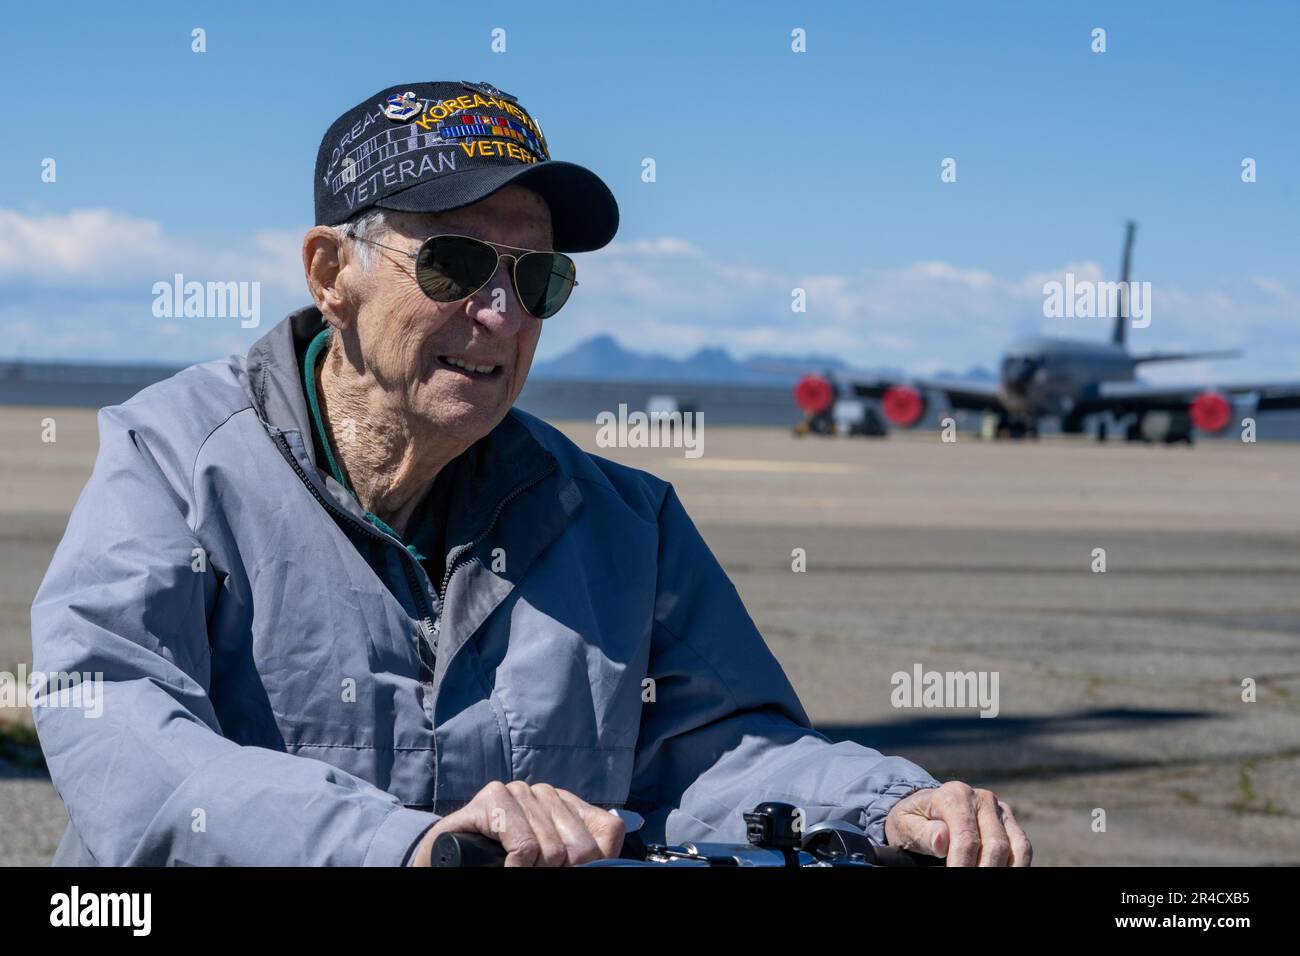 Retired Master Sgt. Eugene T. Beal enters the flightline April 3, 2023, at Beale Air Force Base, California. Eugene enlisted in March 1952, and was sent to fight in the Korean War as a tail gunner in the B-29 Superfortress. Eugene spent most of his career as a boom operator in the KC-97 Stratofreighter and the KC-135 Stratotanker. Stock Photo